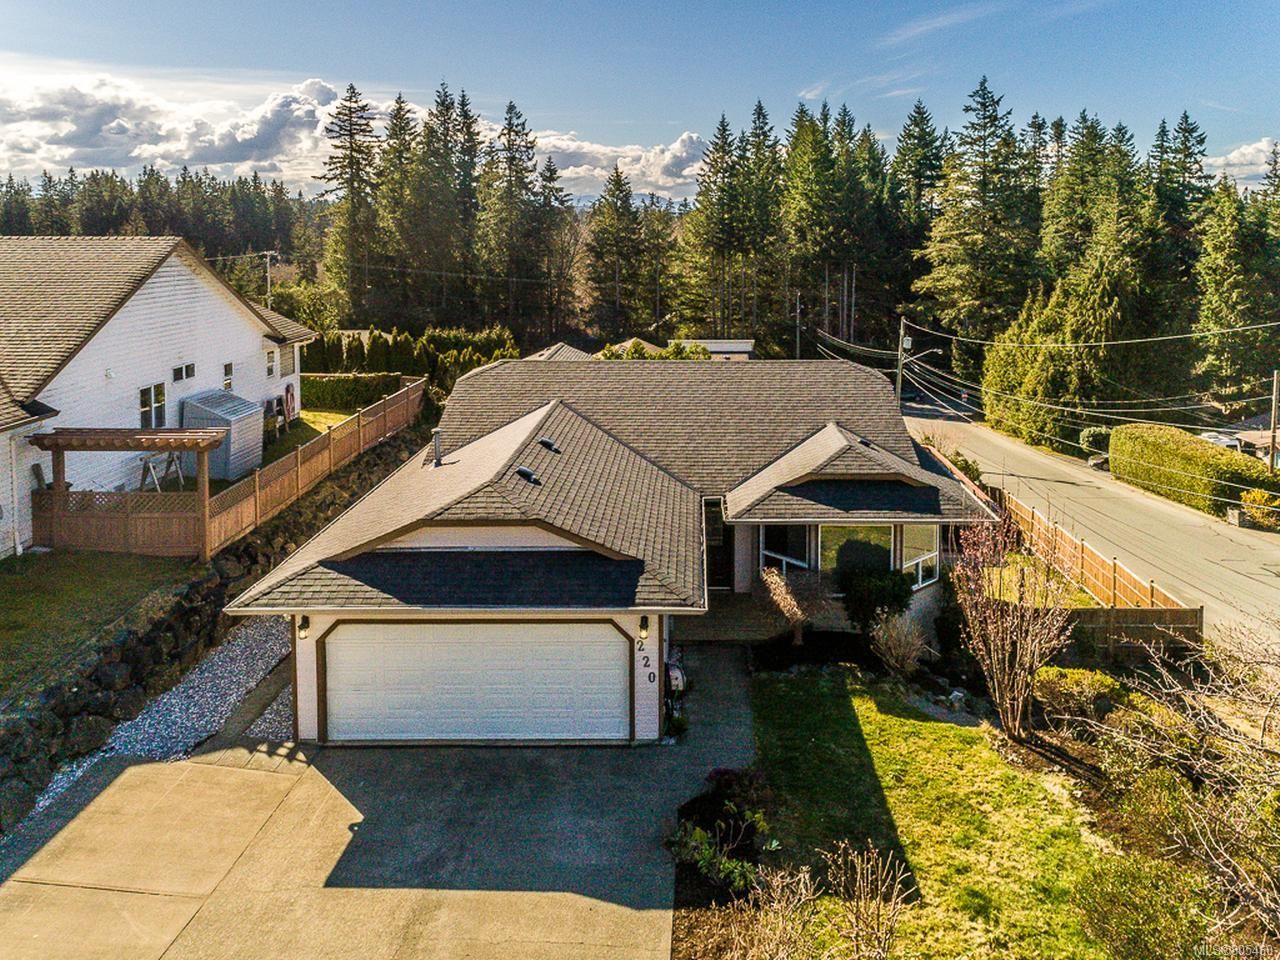 Main Photo: 220 STRATFORD DRIVE in CAMPBELL RIVER: CR Campbell River Central House for sale (Campbell River)  : MLS®# 805460